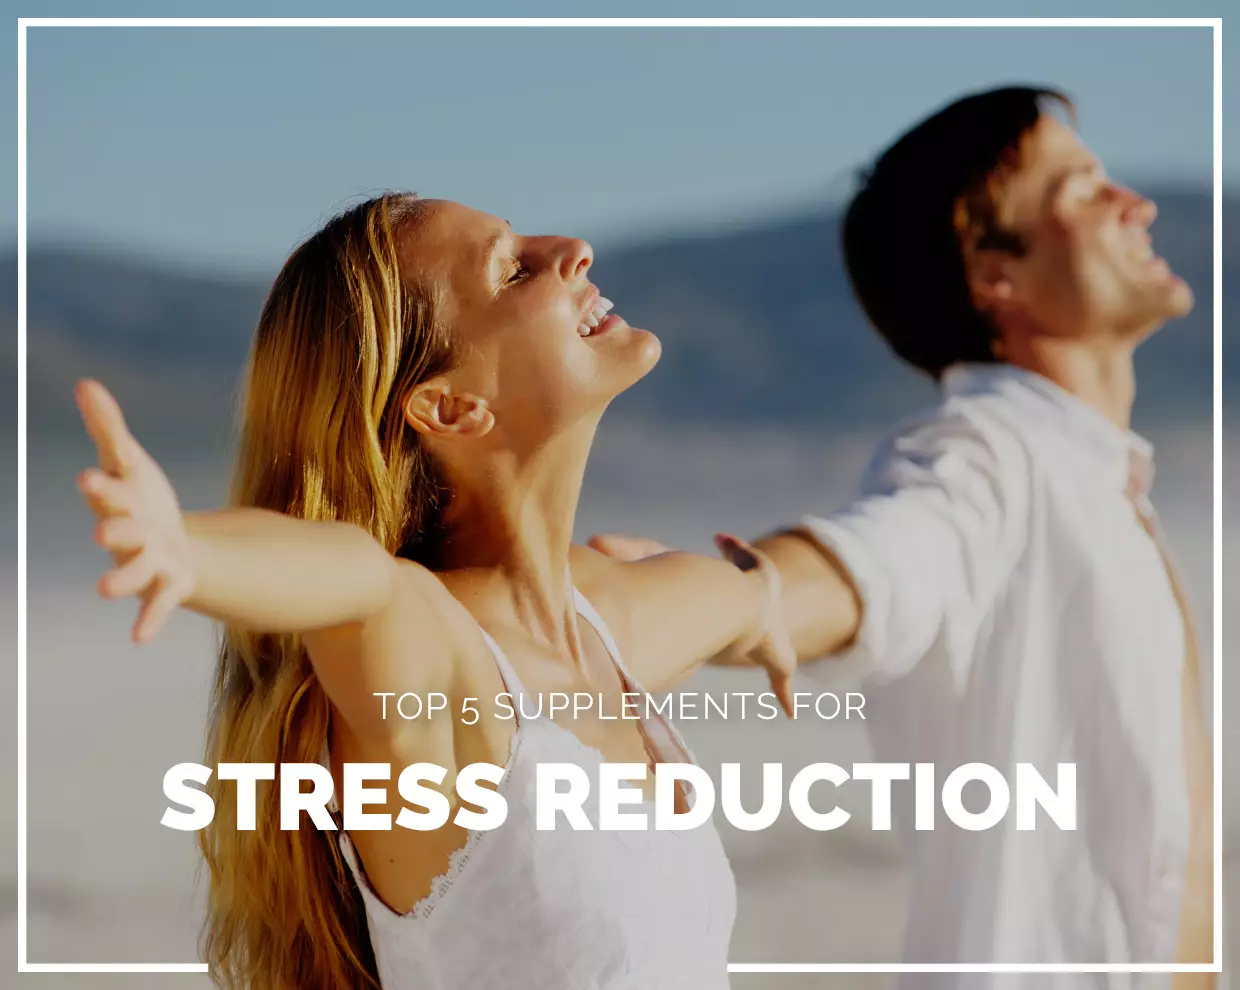 Top 5 Supplements For Stress Reduction